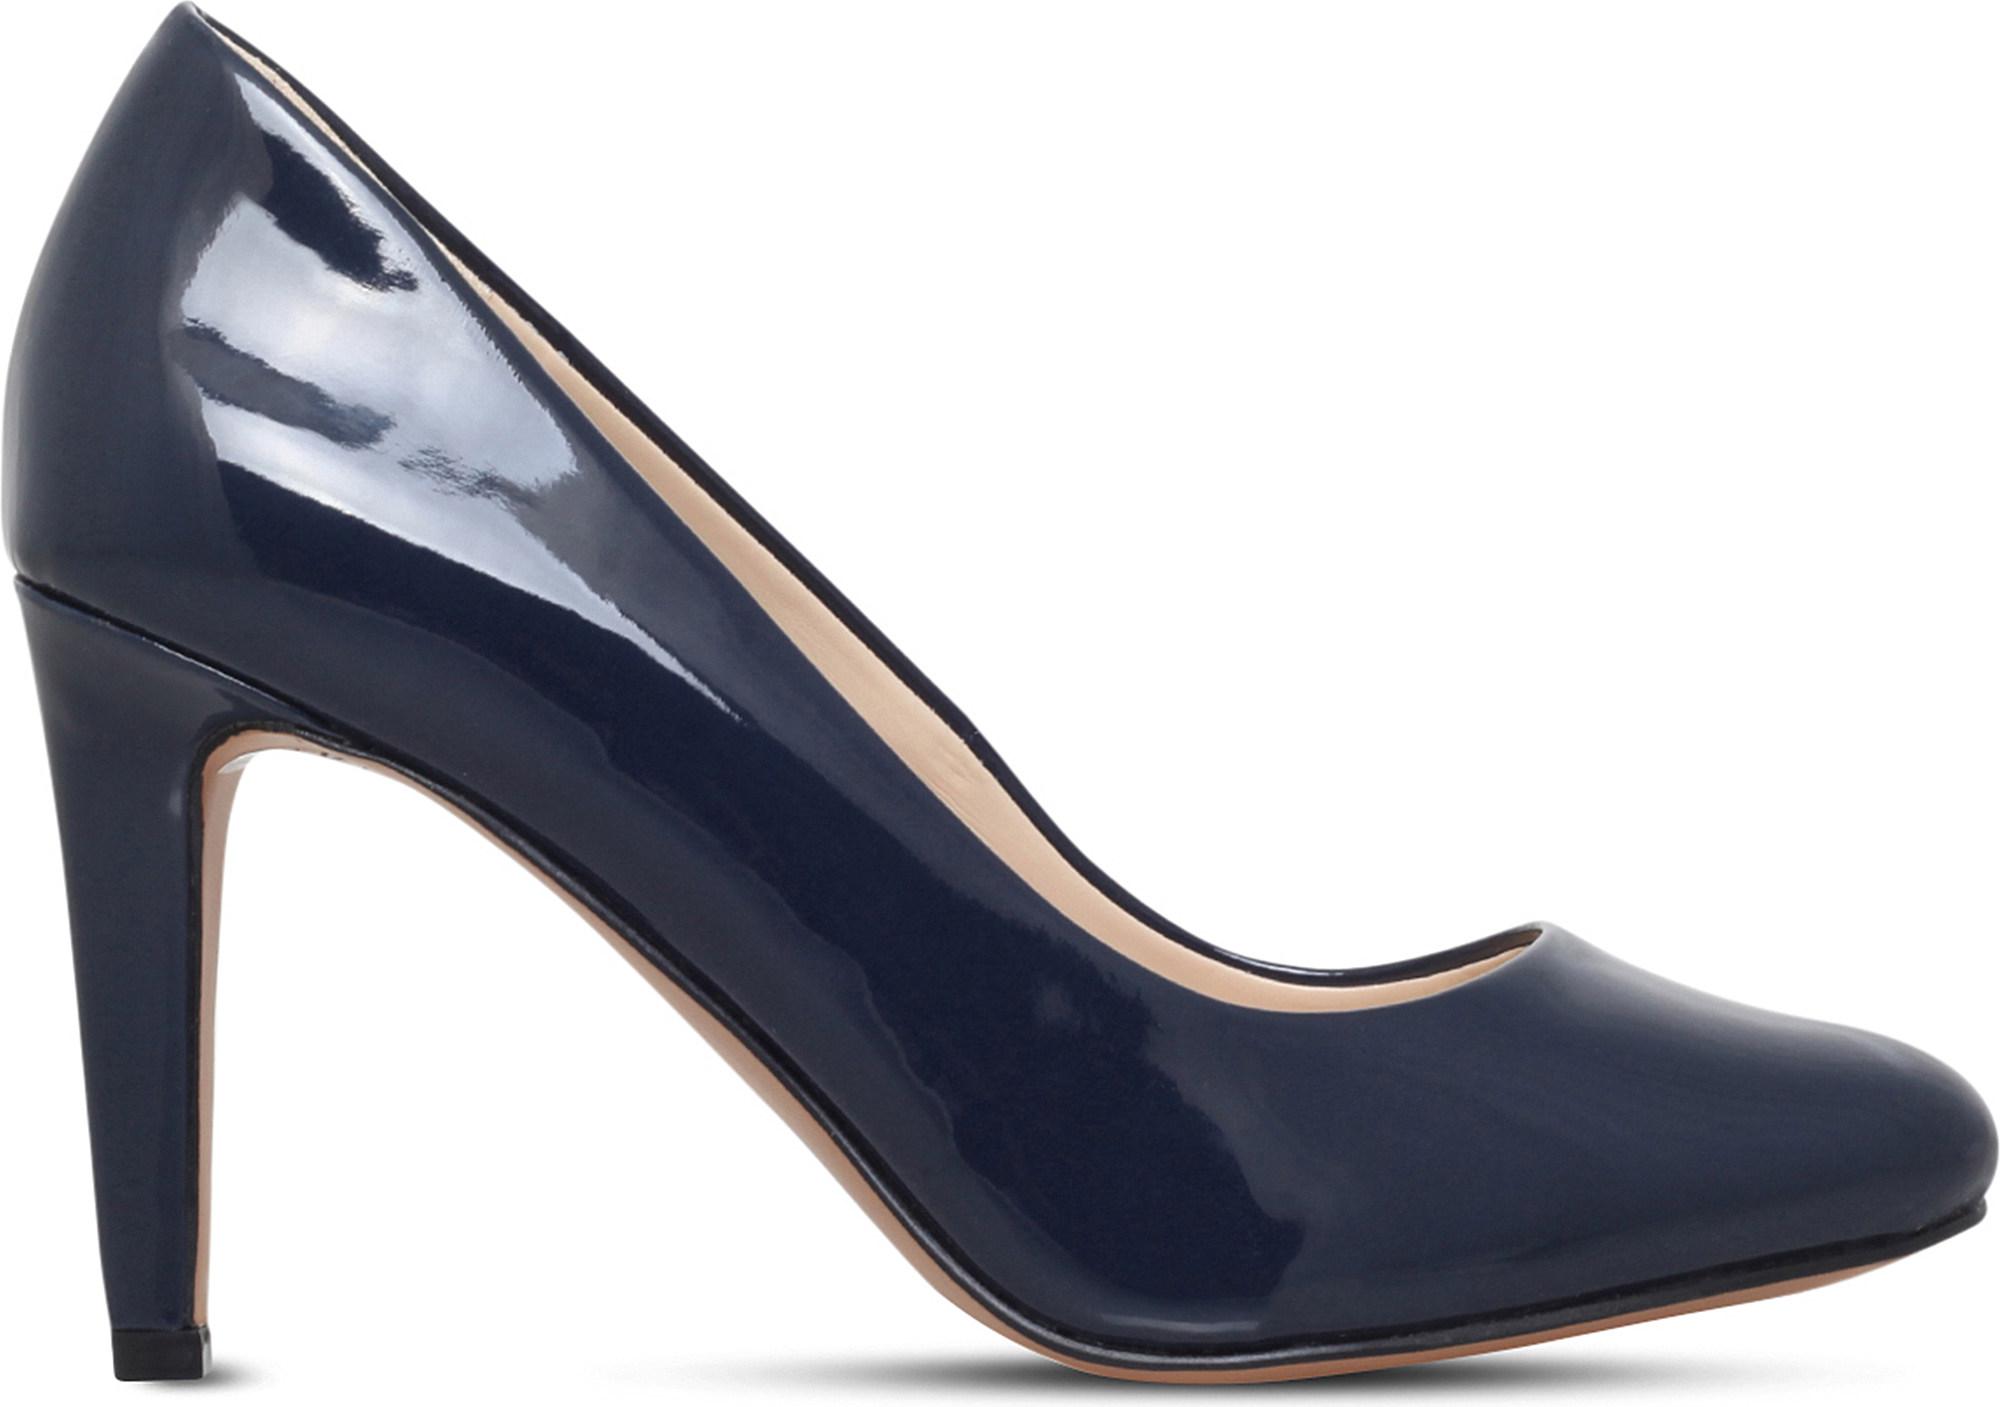 Lyst - Nine West Handjive Patent-leather Court Shoes in Blue